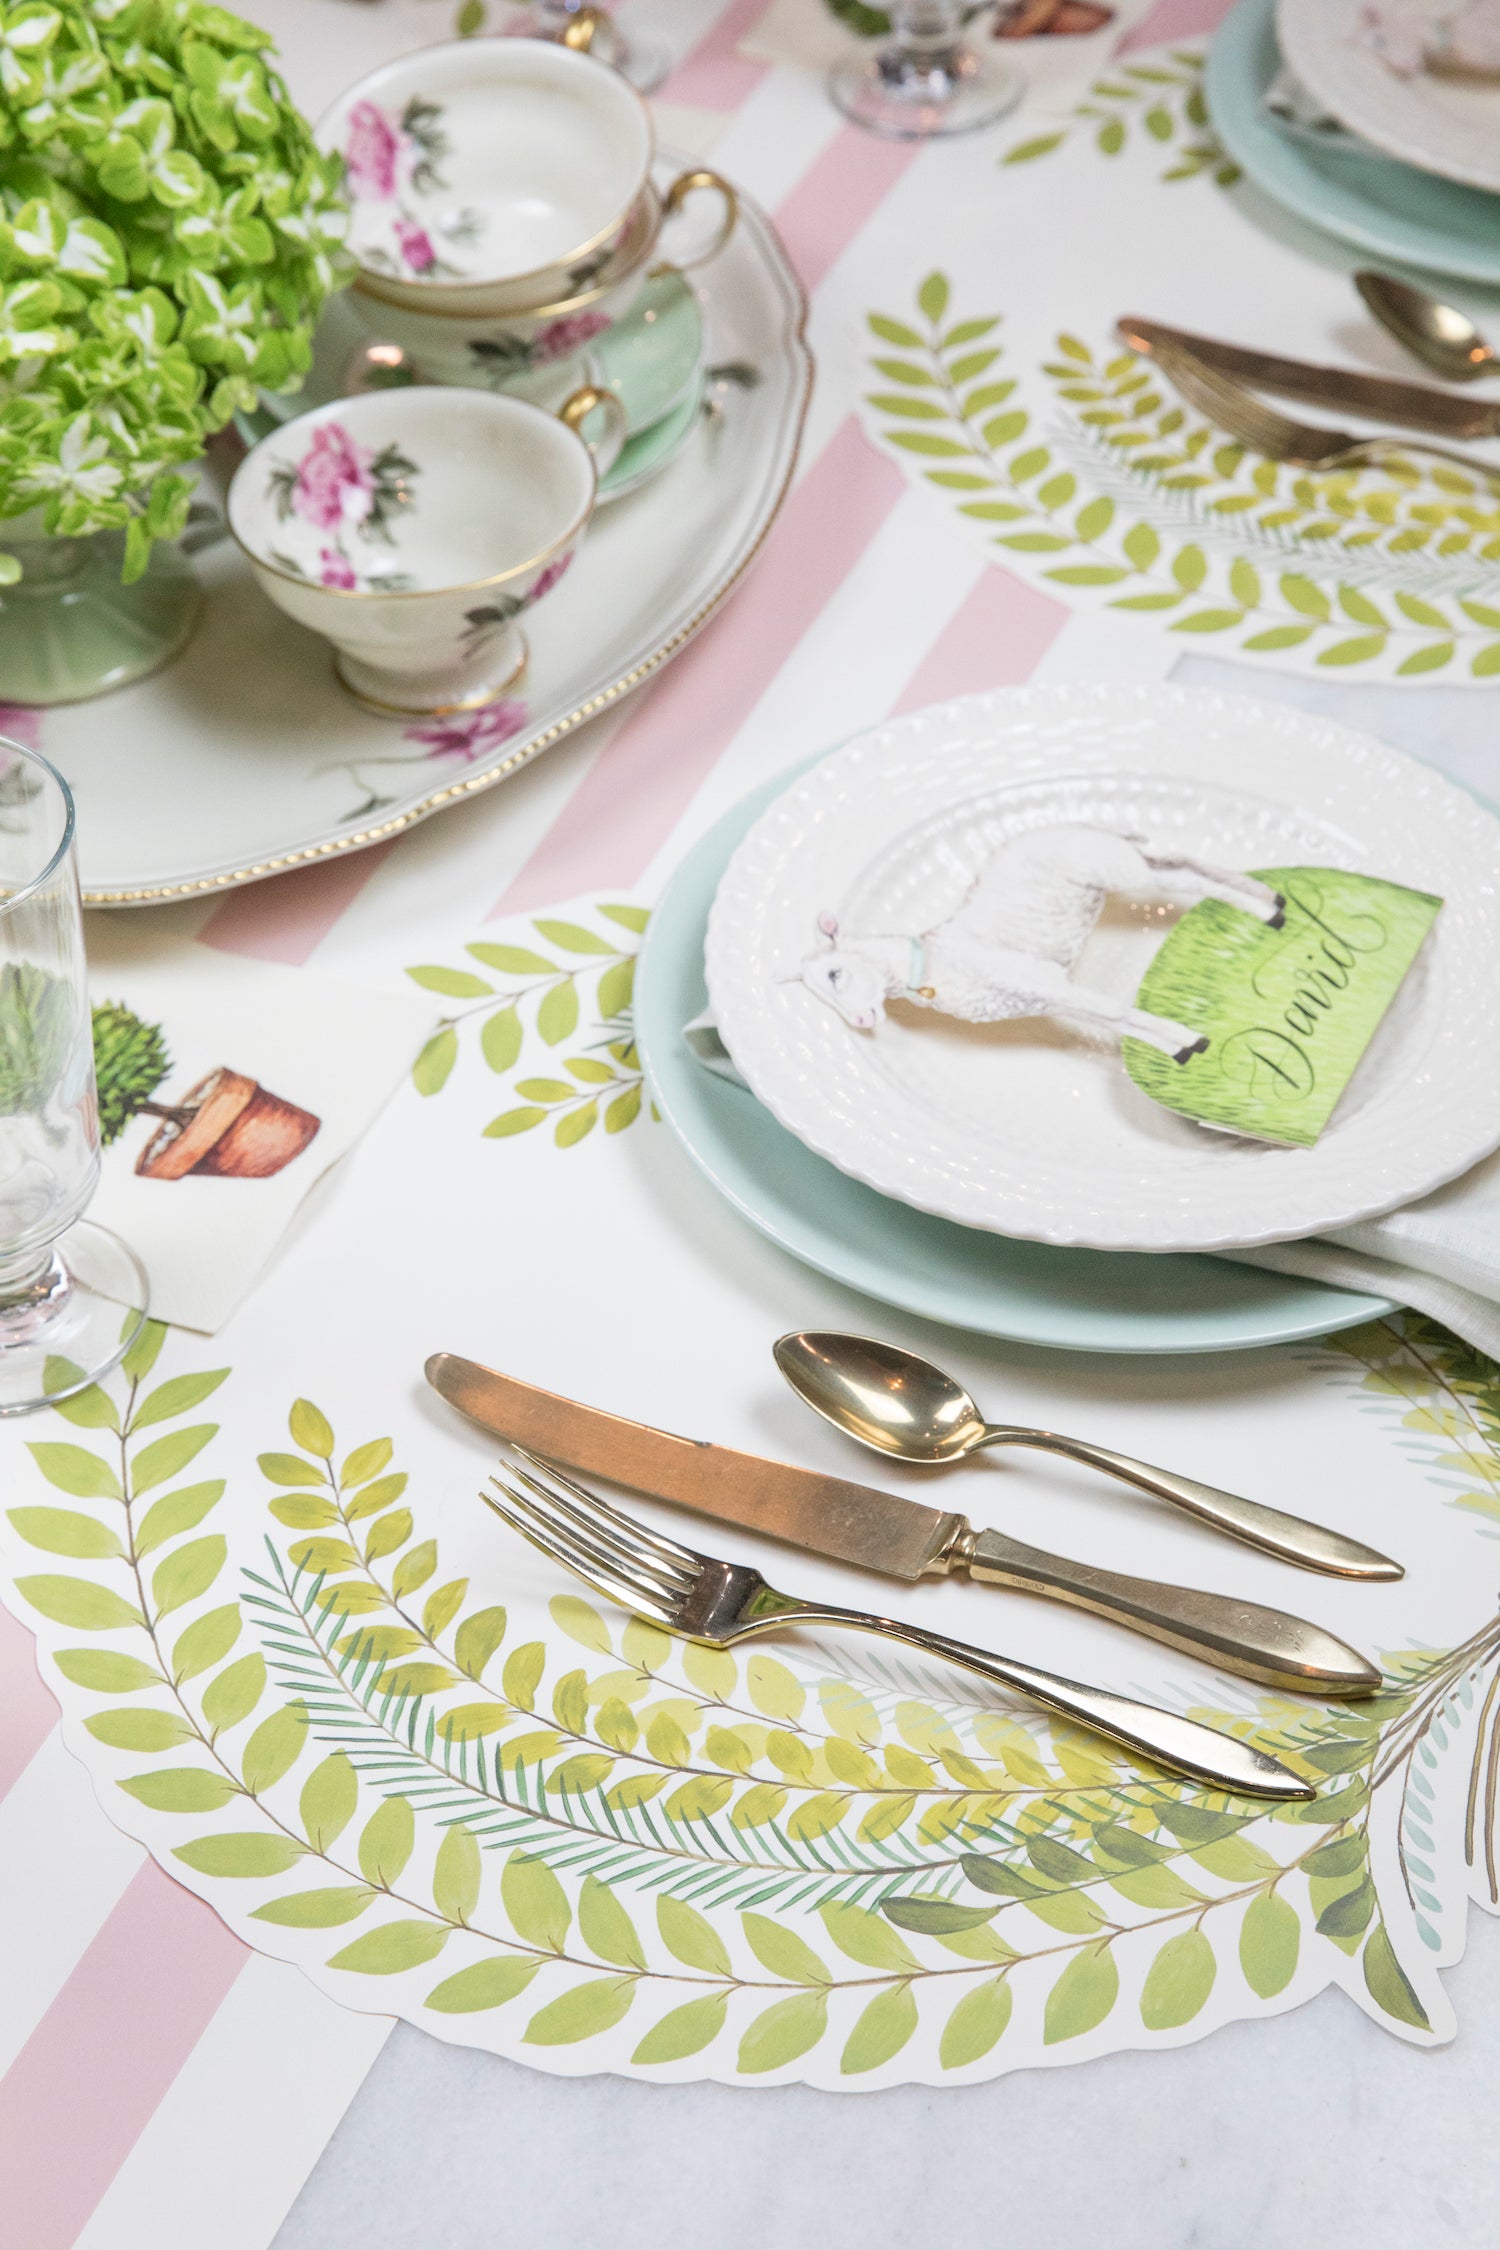 The Die-cut Seedling Wreath Placemat under an elegant springtime table setting, at an angle.